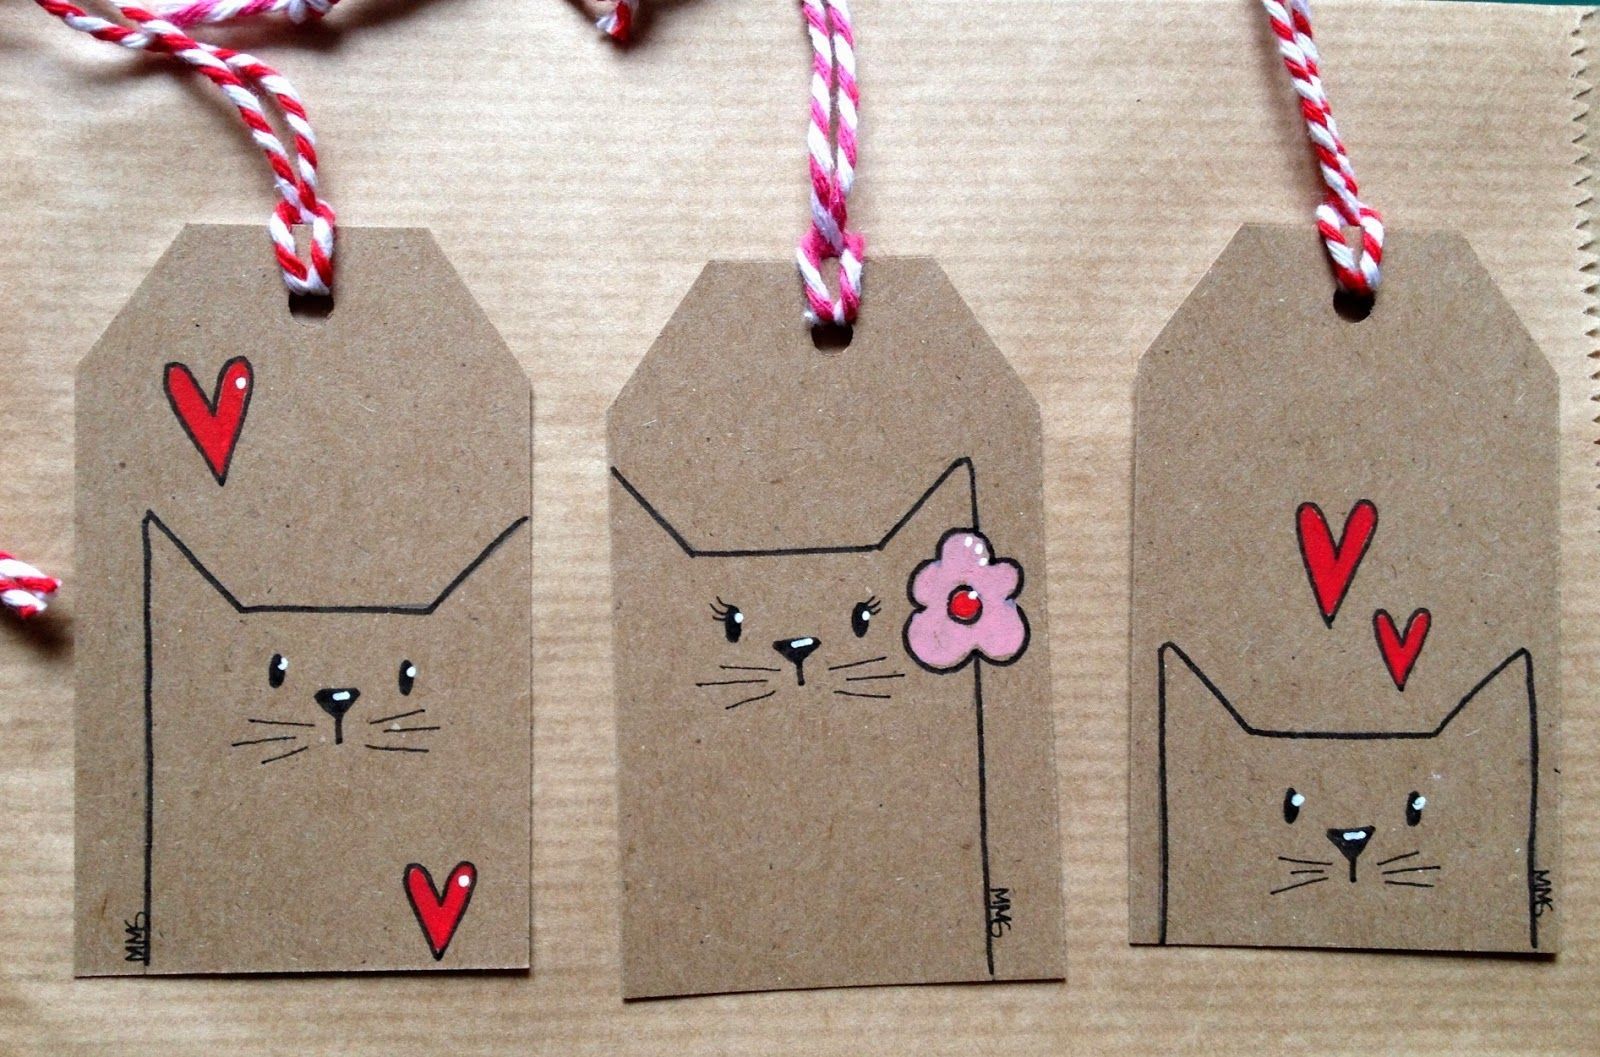 Simple little cat tags – I love the black lines and minimal color